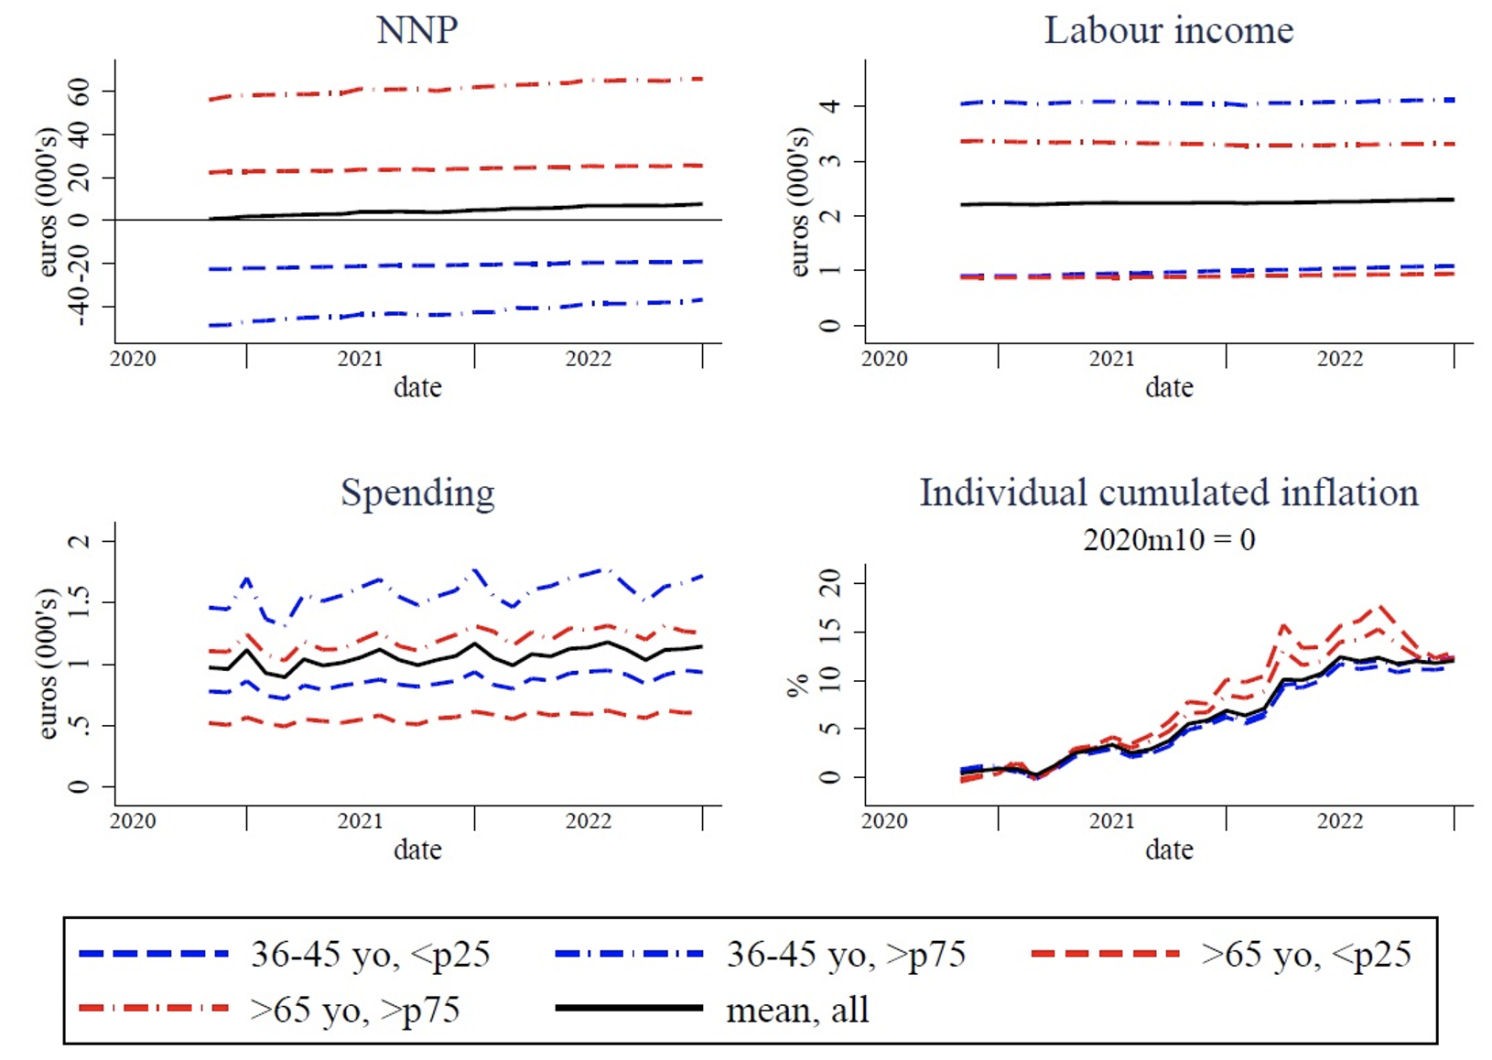 Figure 3 Dynamics of NNP, income, spending, and individual inflation for middle-aged and older individuals